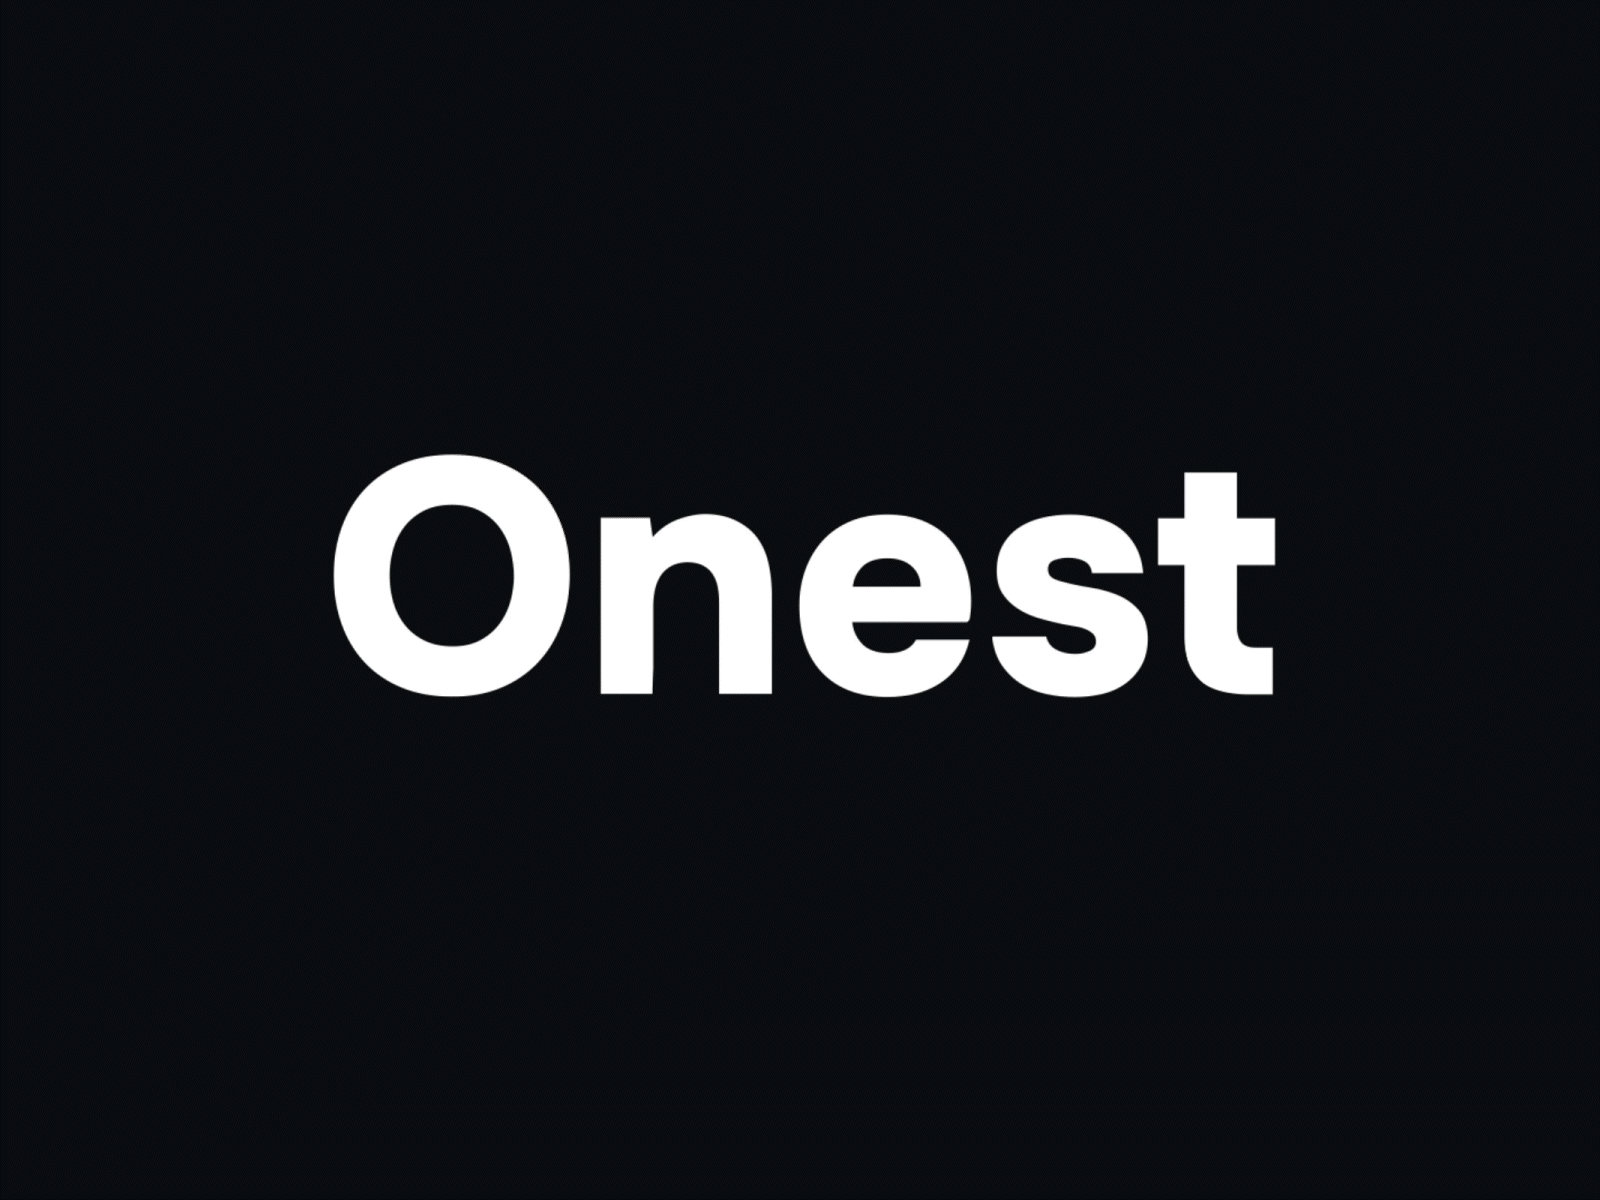 Onest - Animated typogrpahy 2d 2danimation after effects animated font animation font kinetic type motion motion design motion graphics type typography